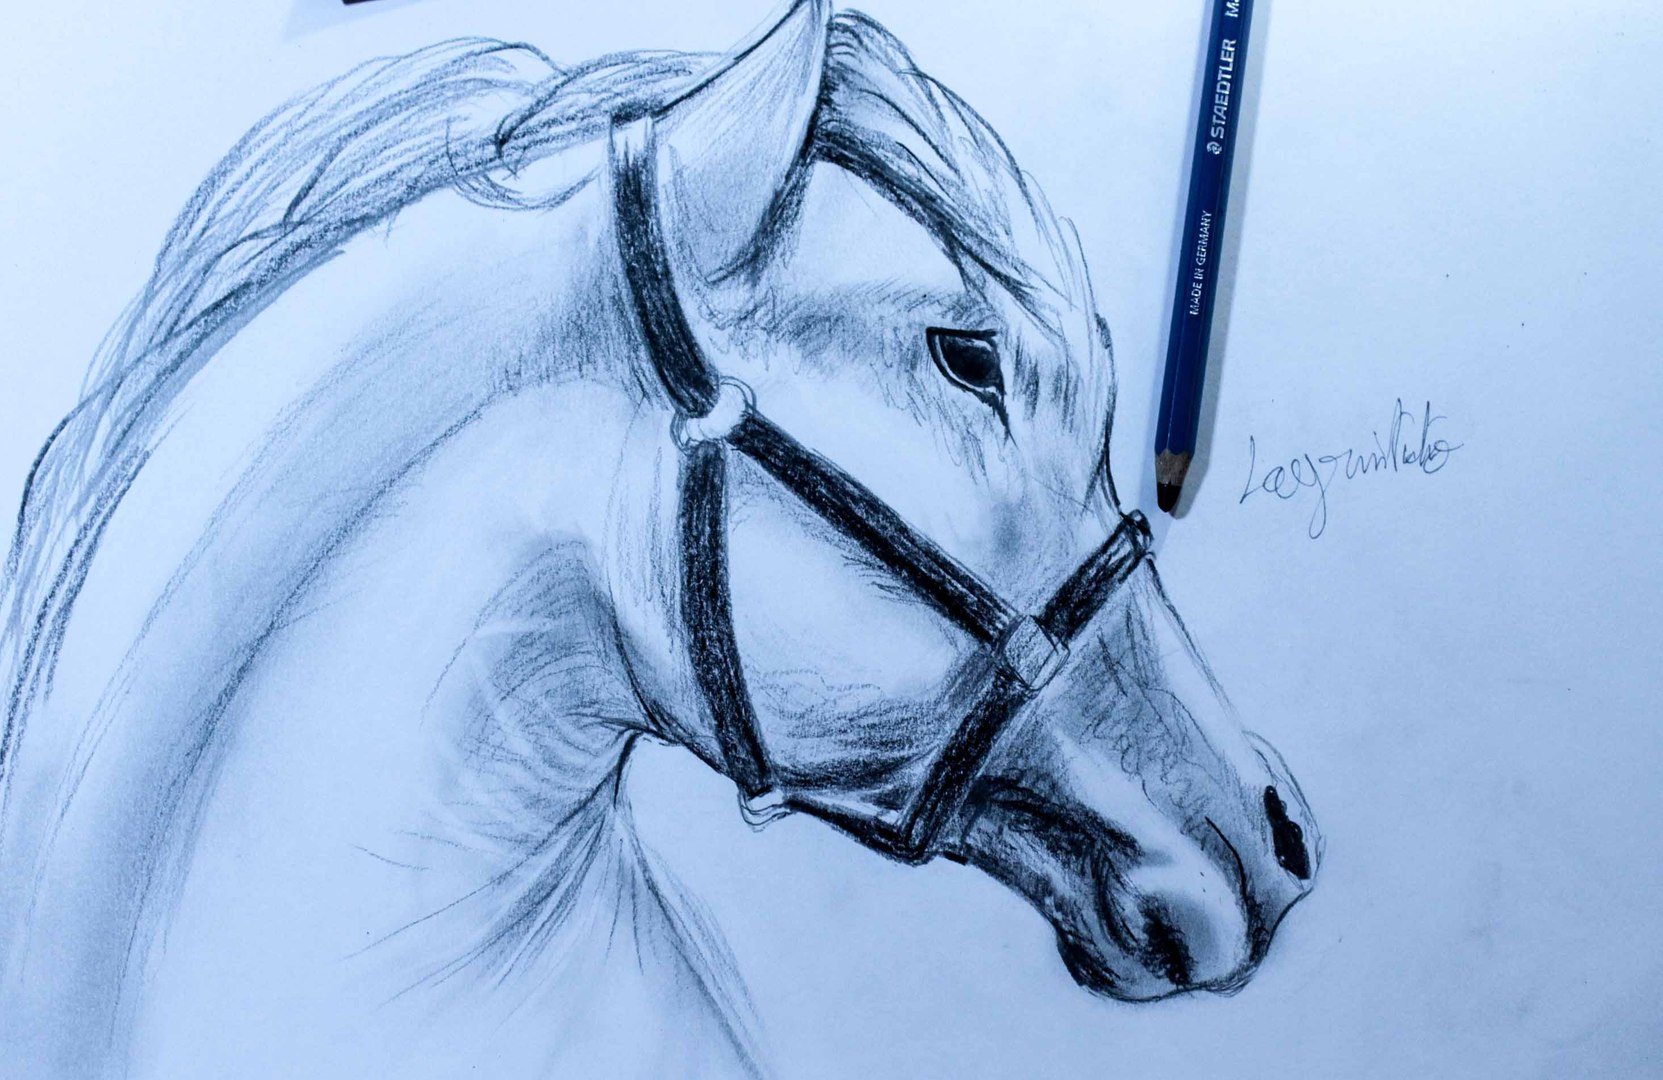 How to draw a Horse تعلم رسم حصان بقلم الرصاص